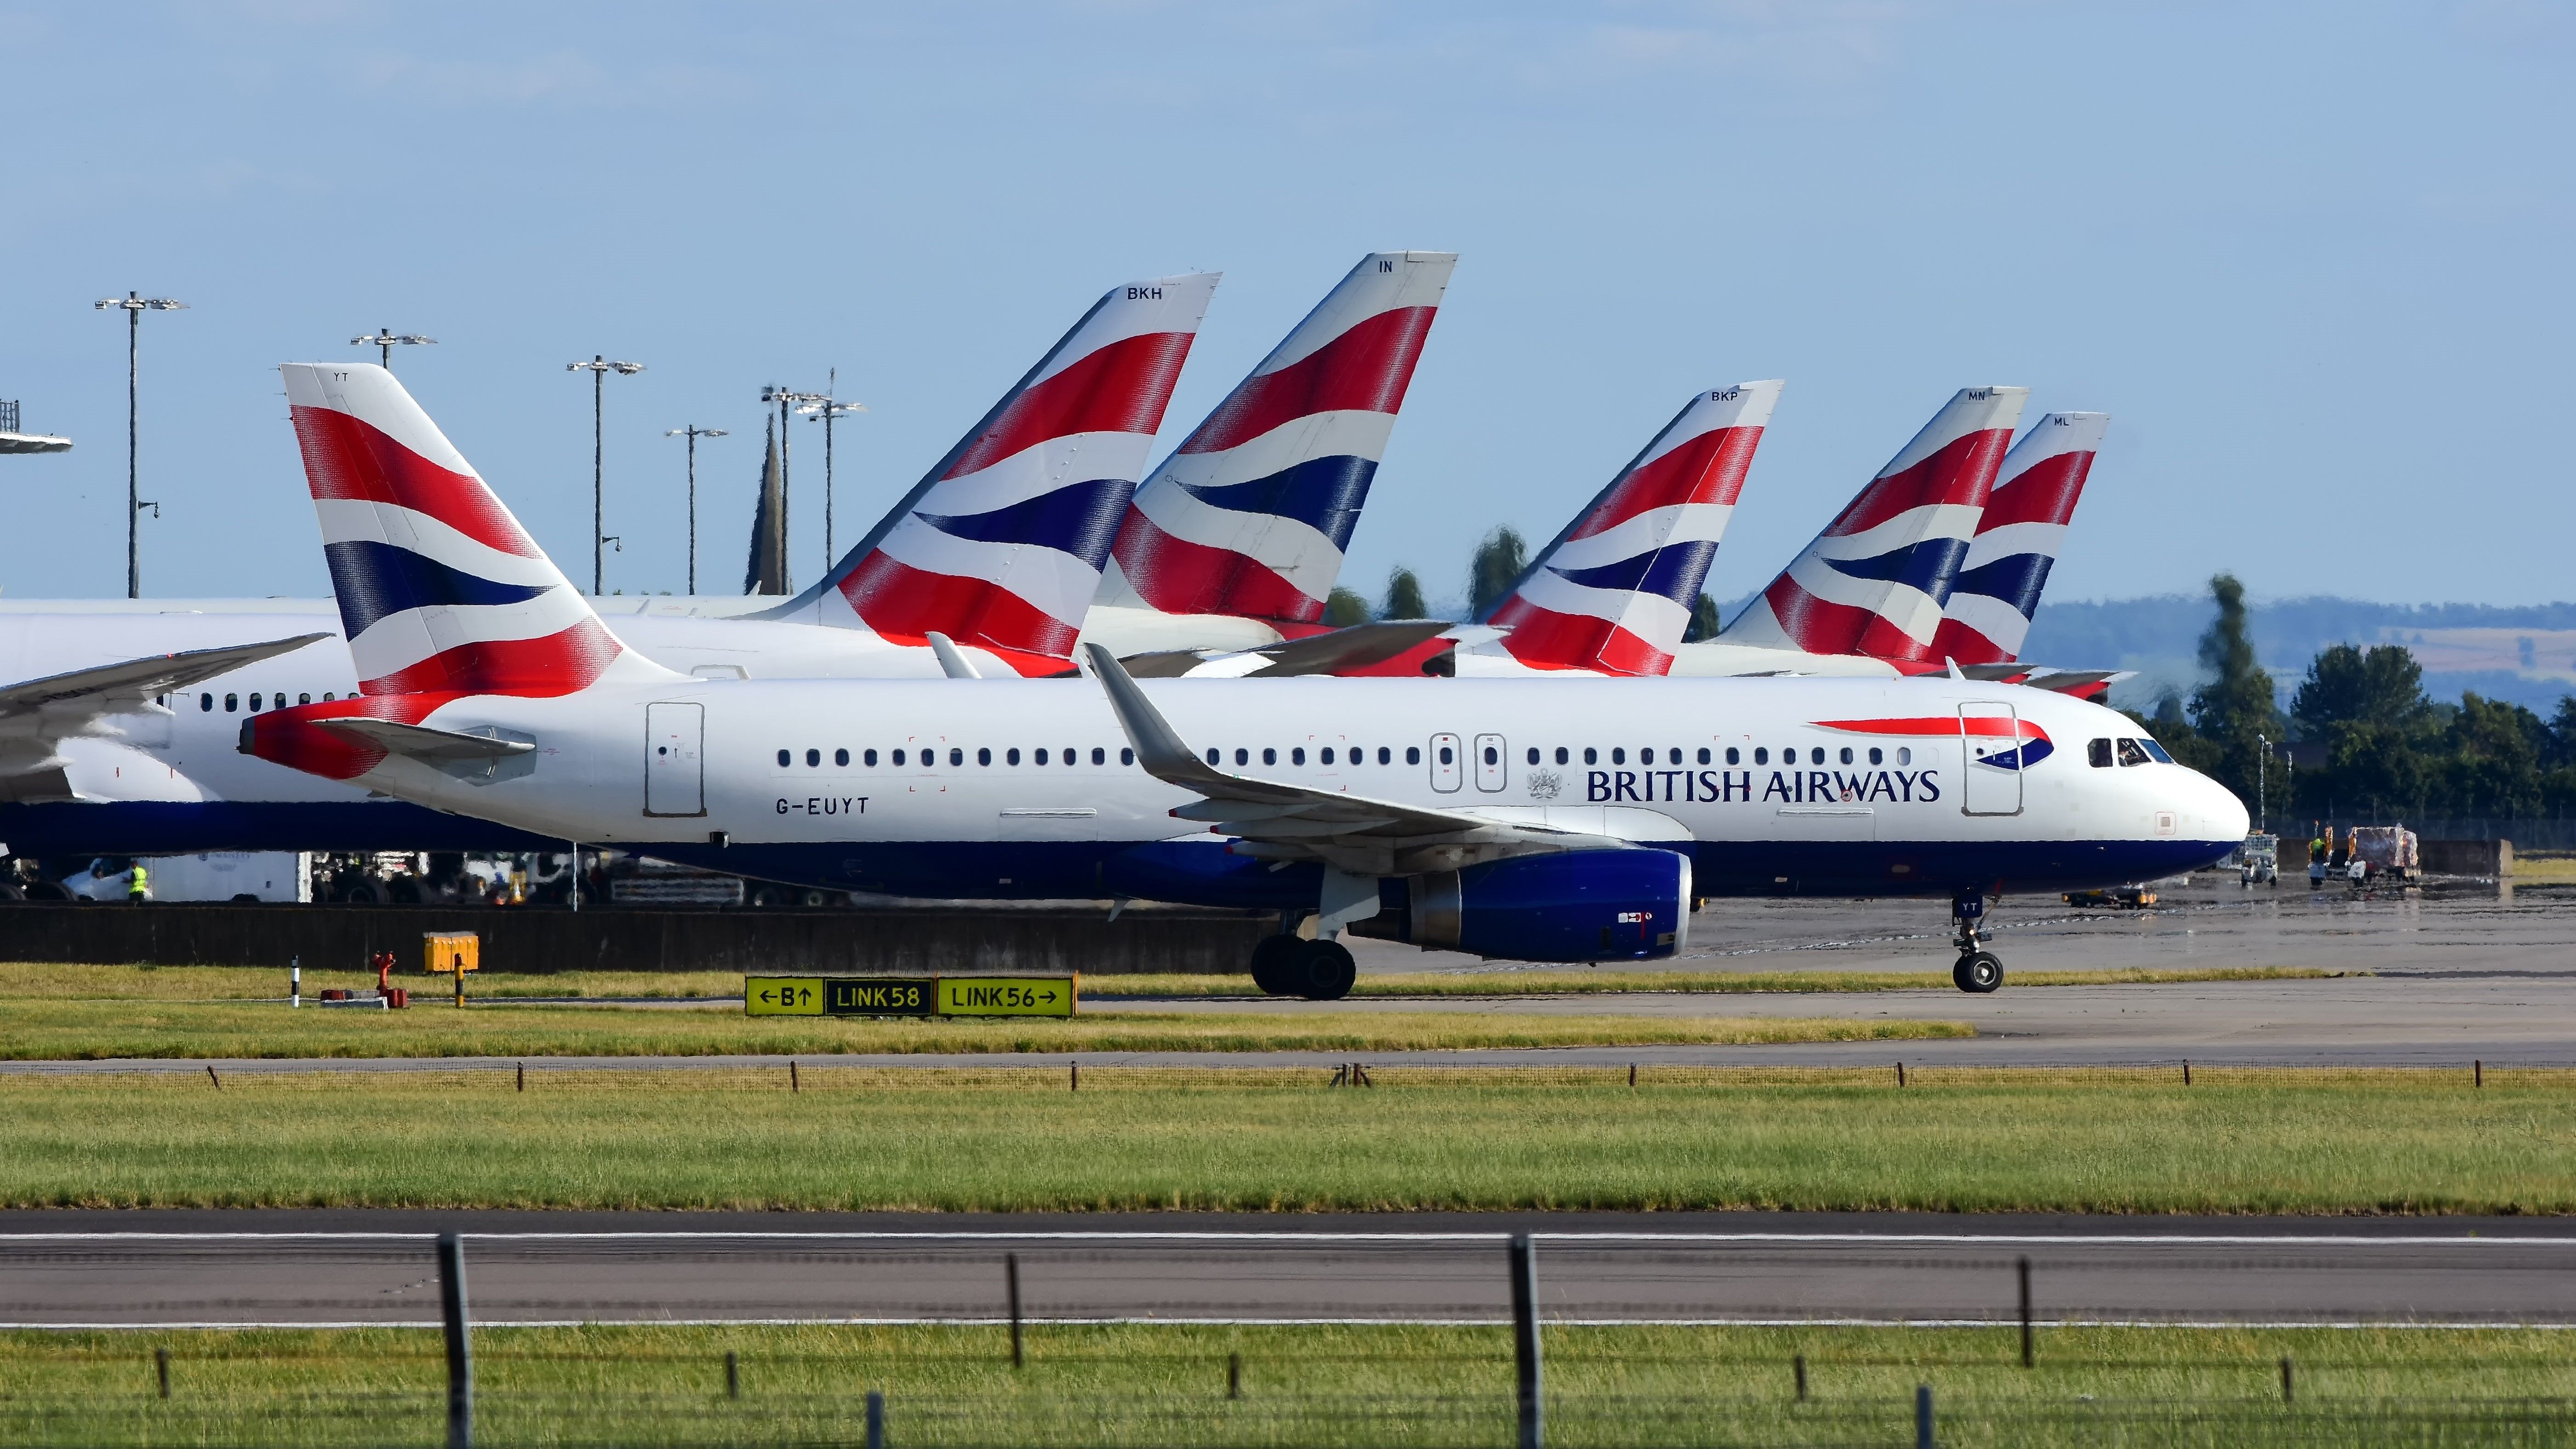 British Airways Airbus A320 Taxiing At London Heathrow Airport